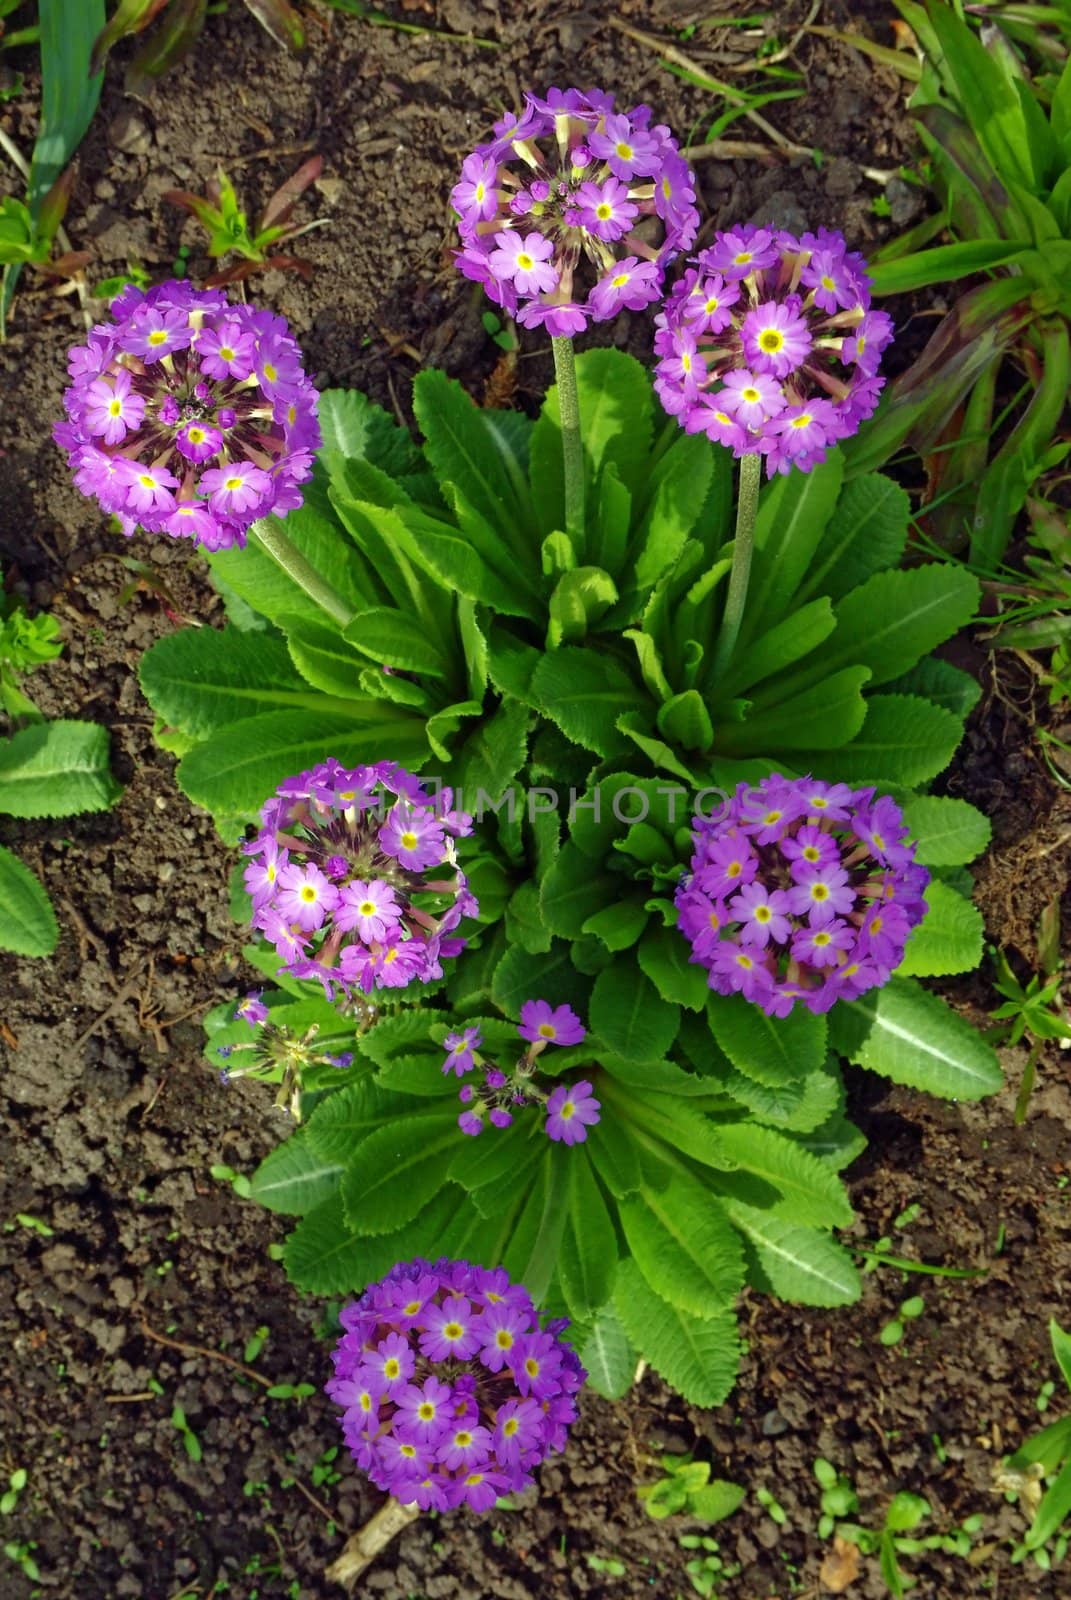 Magenta primrose (primula vulgaris) one of the first flowers to blossom in spring